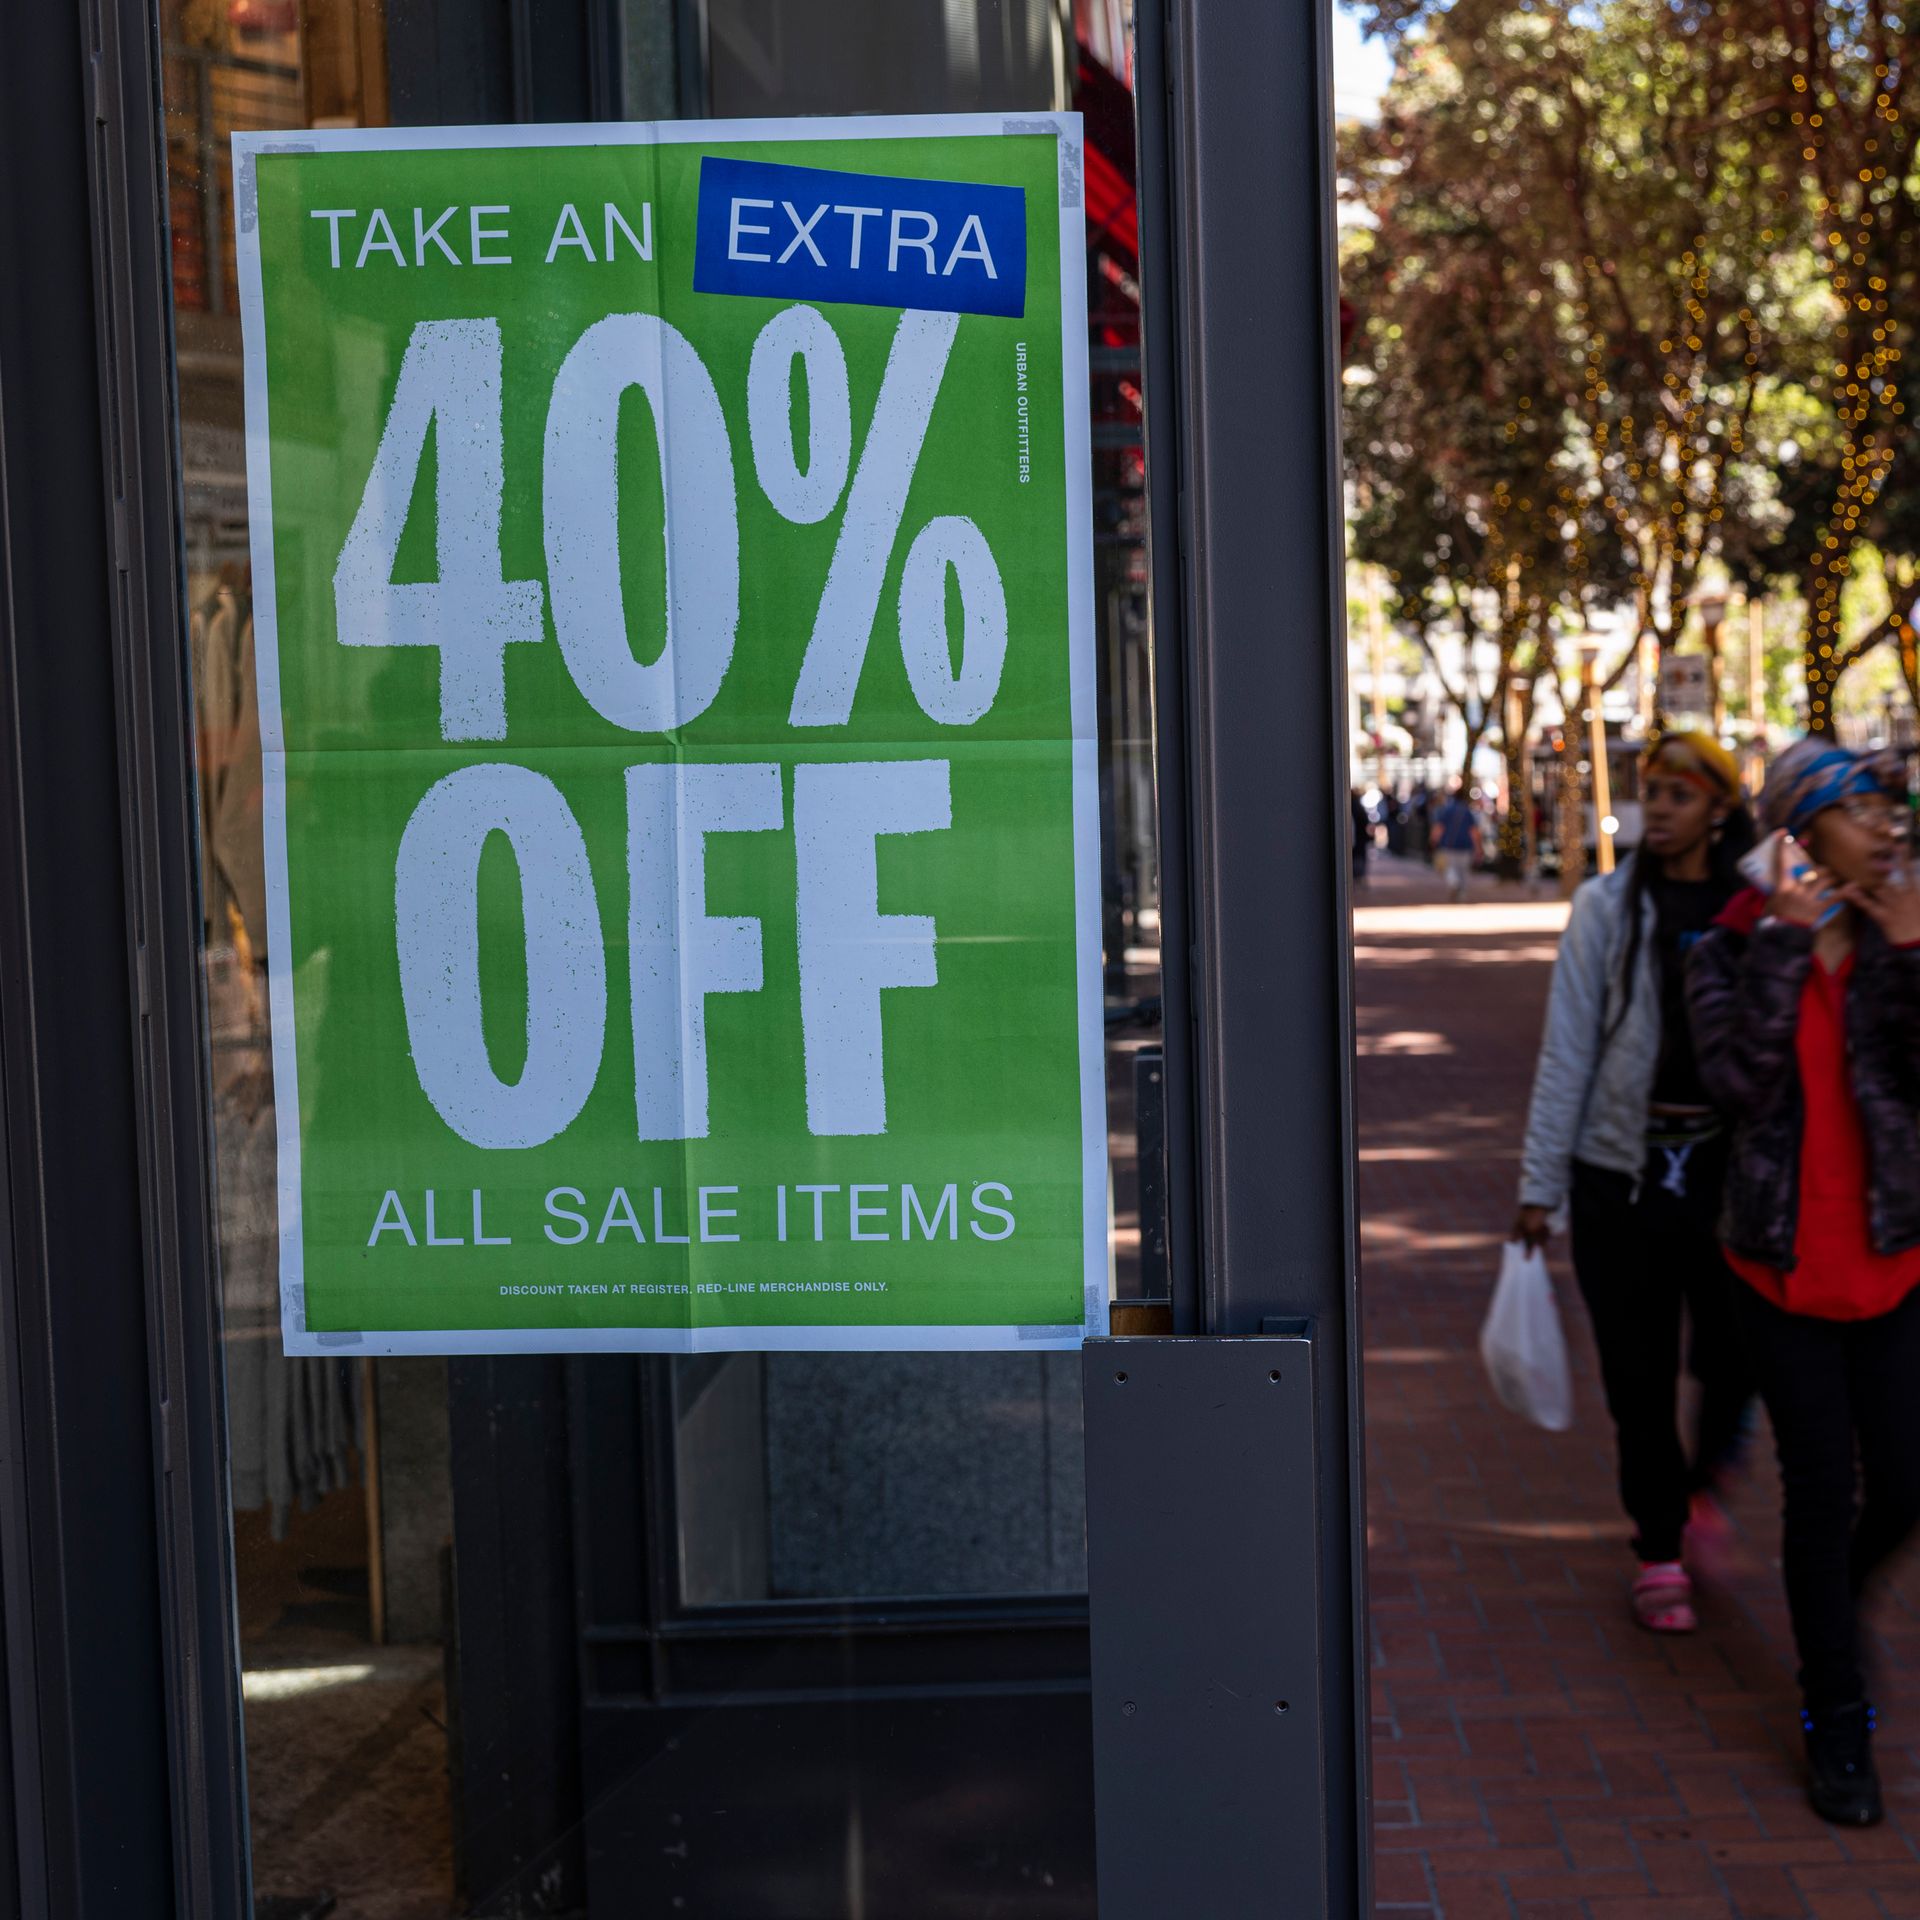 A sale sign in the window of a store in San Francisco.